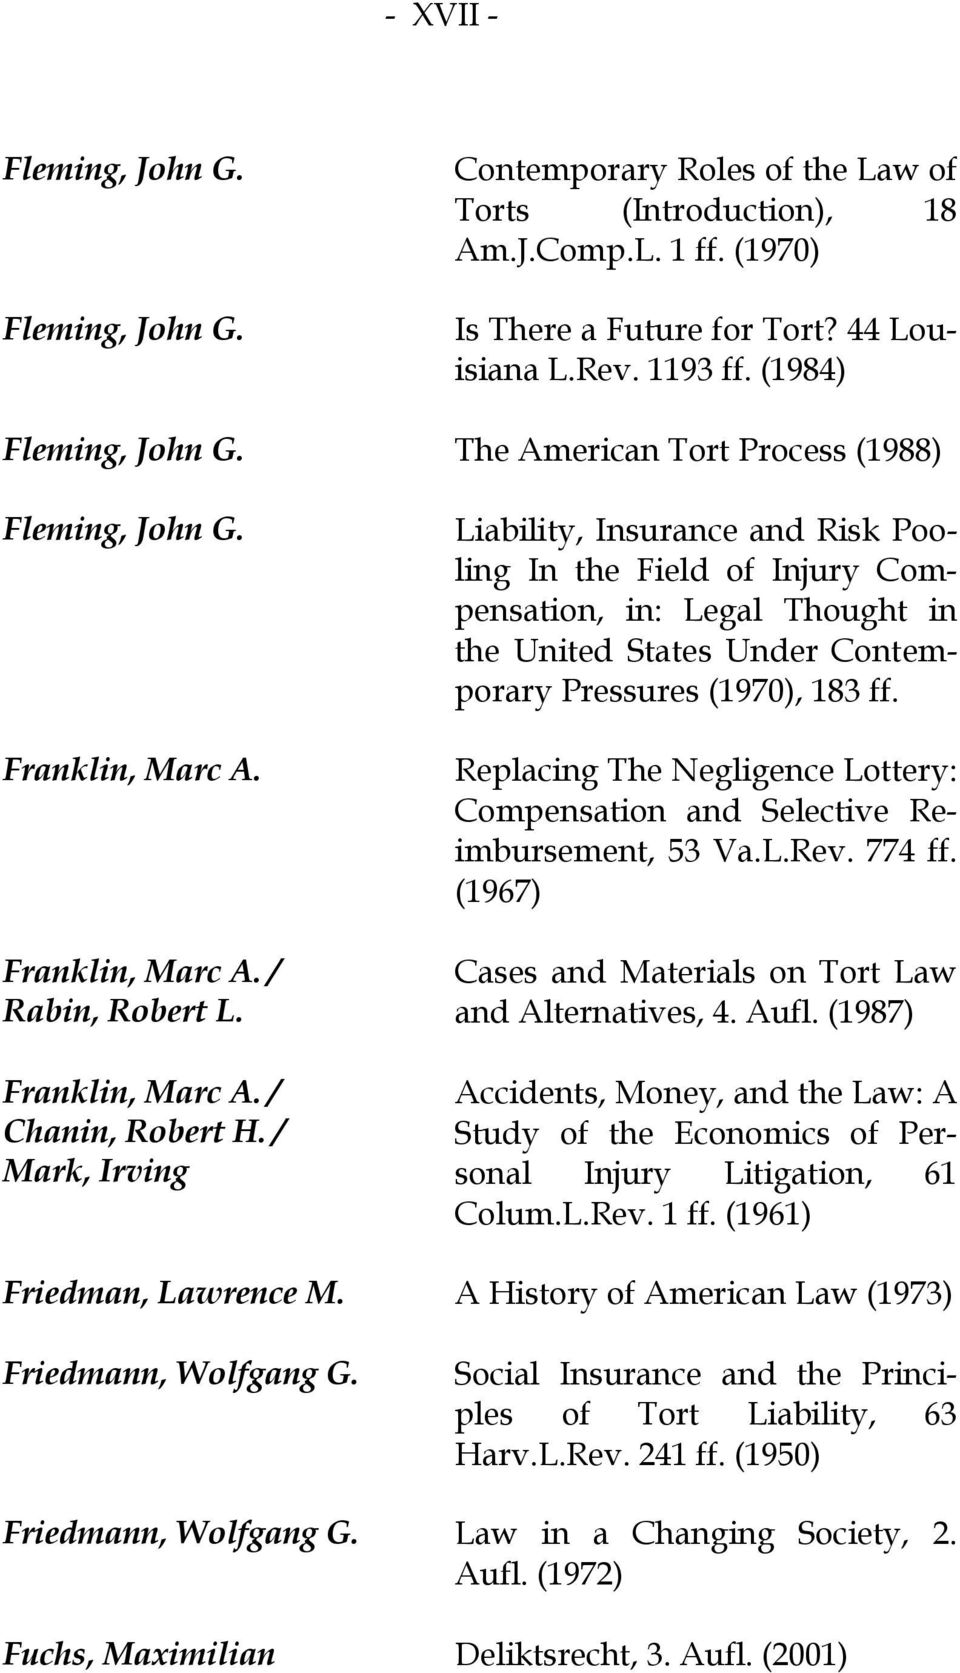 / Mark, Irving Liability, Insurance and Risk Pooling In the Field of Injury Compensation, in: Legal Thought in the United States Under Contemporary Pressures (1970), 183 ff.